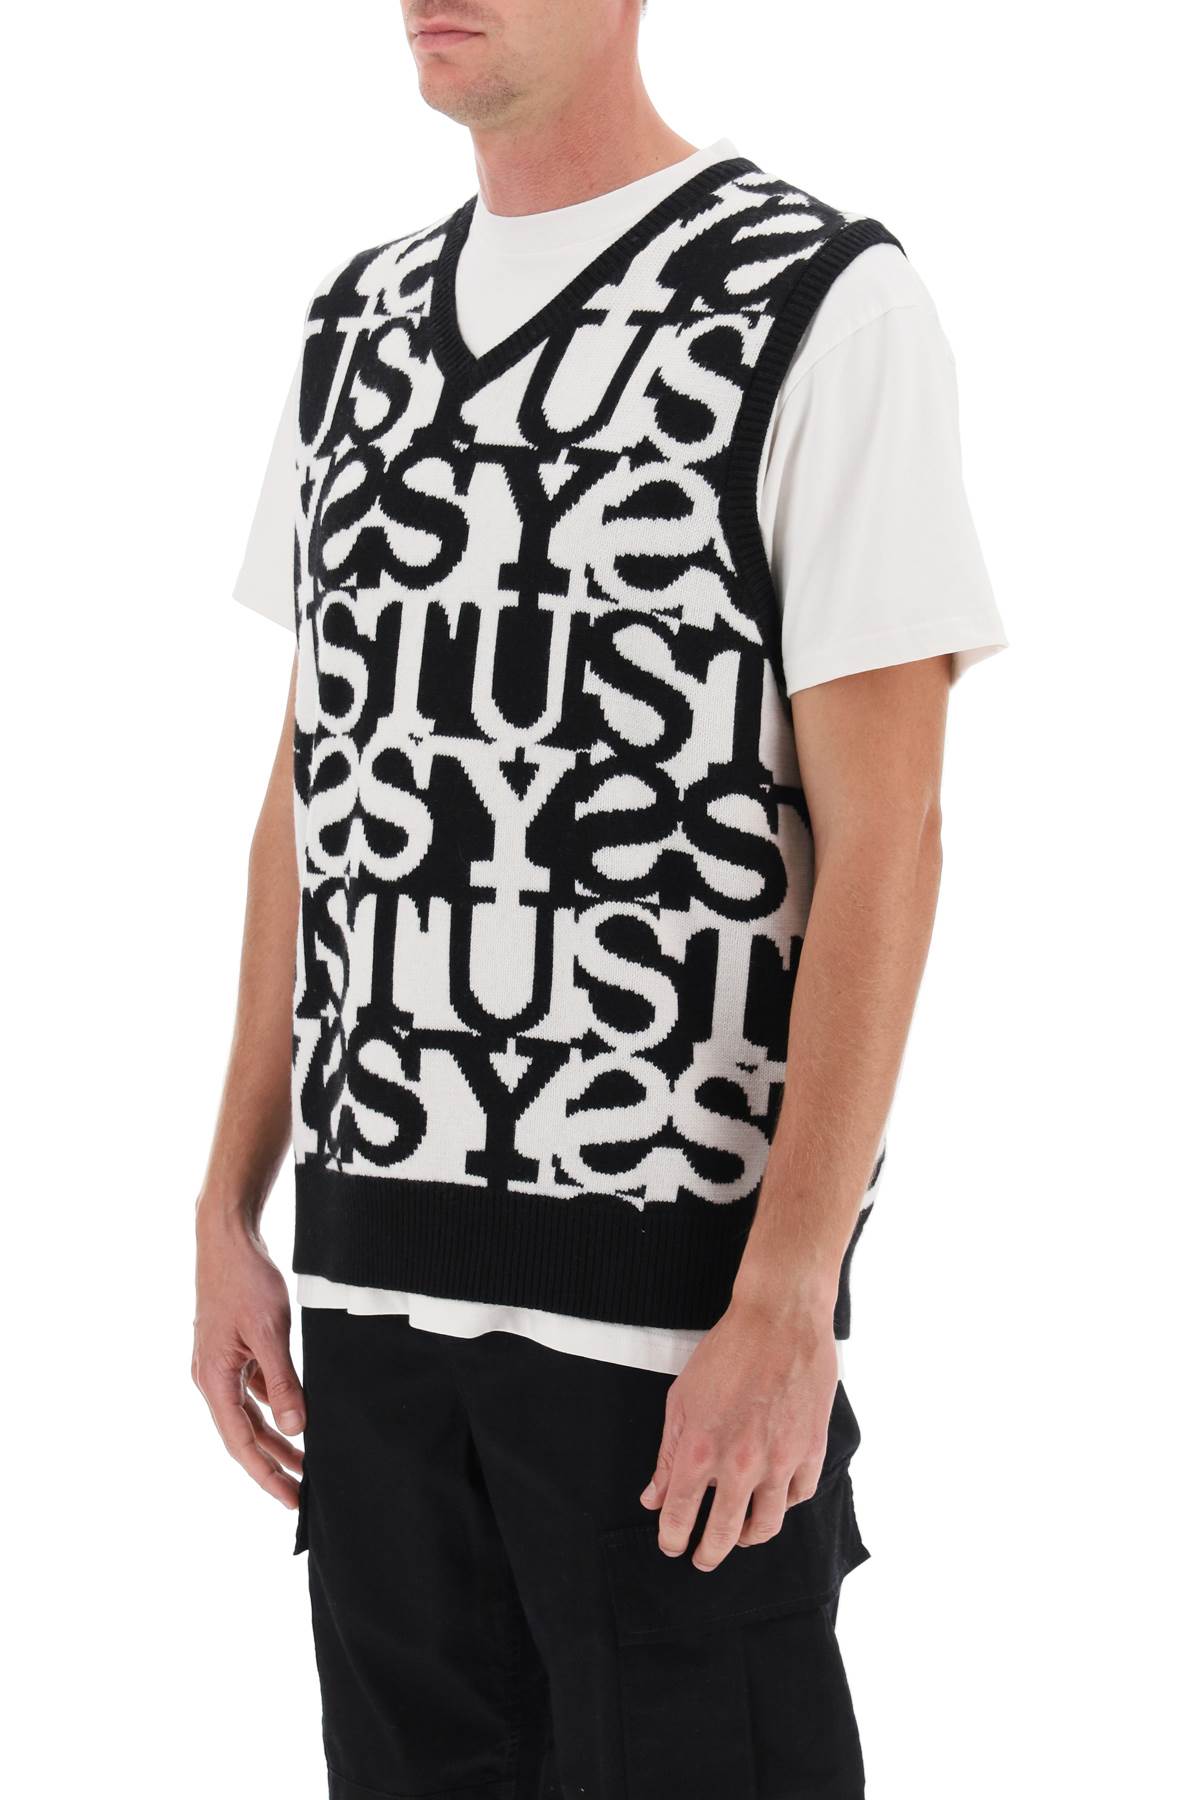 Stussy Stacked Sweater Vest